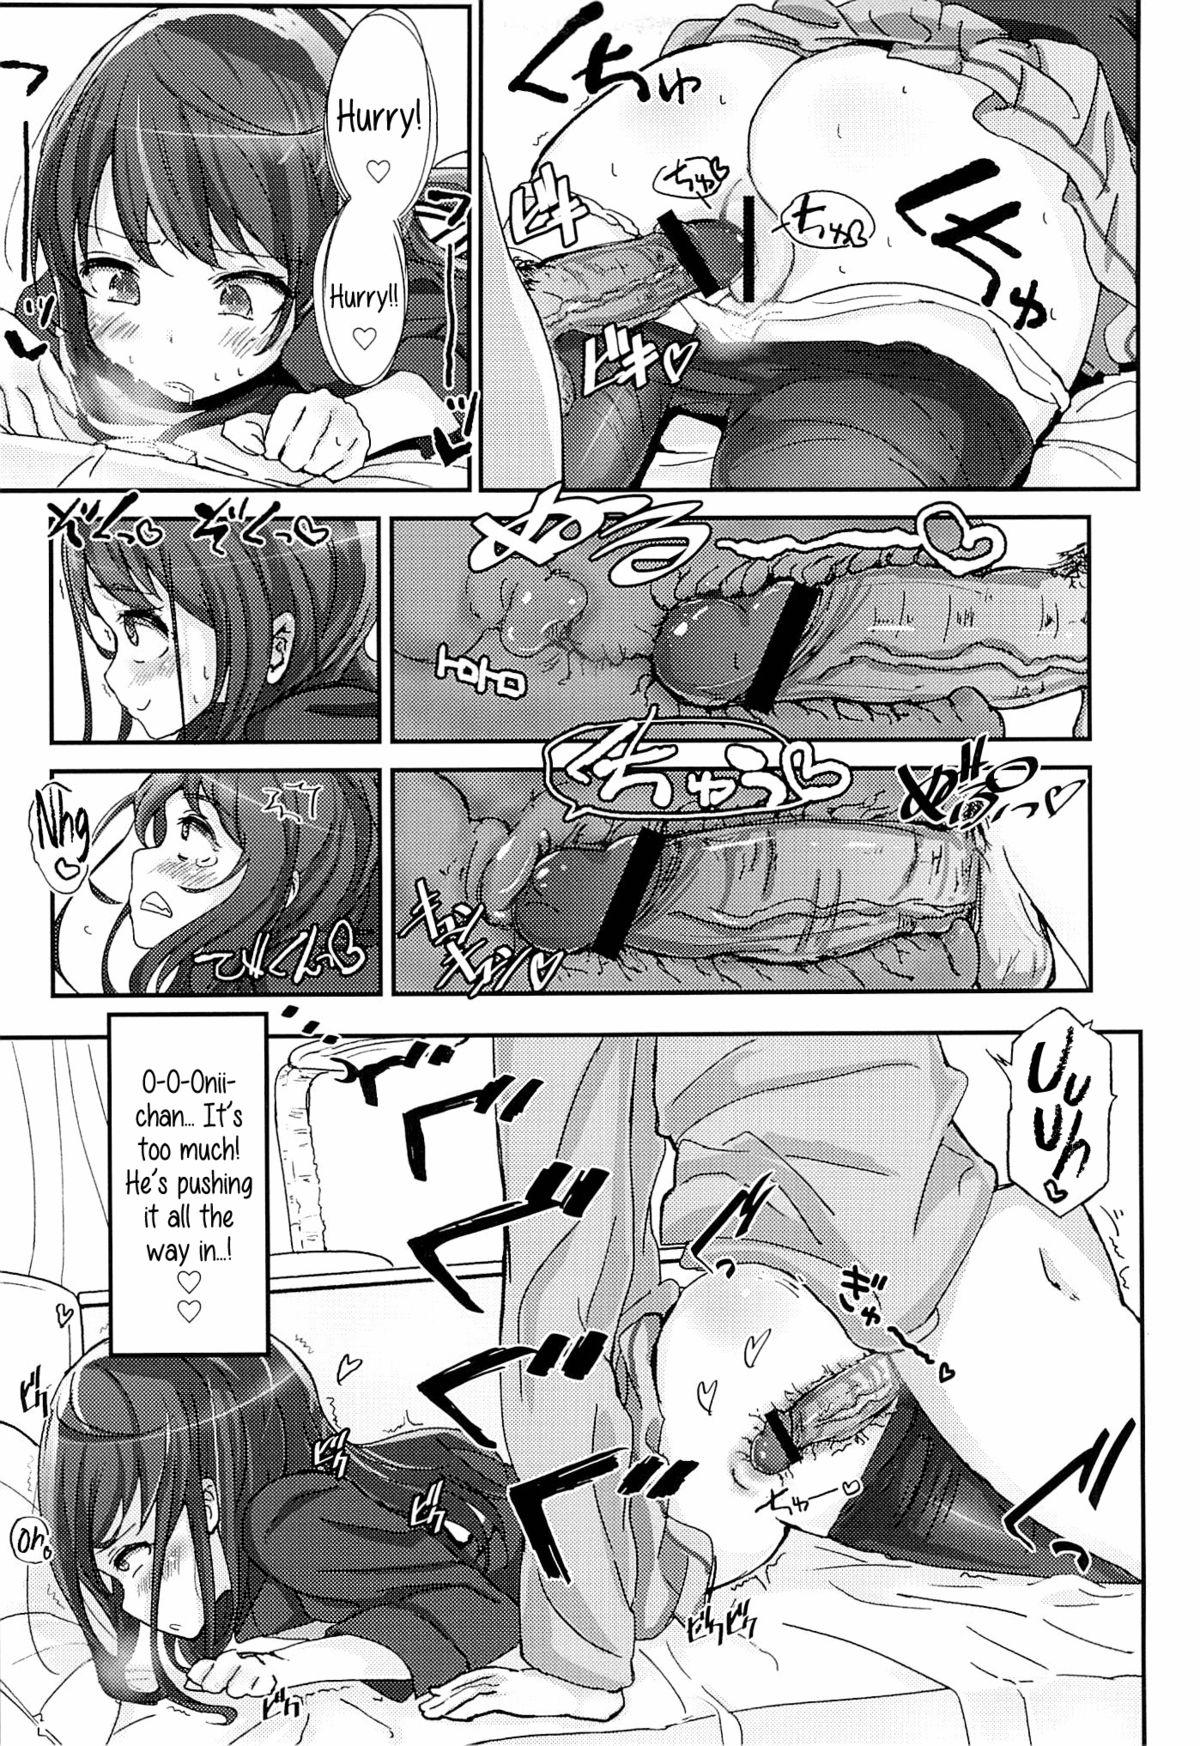 Gay Bukkakeboy Shikyuukou no Kanata, Onii chan no Hate | Beyond the mouth of the uterus lies Onii-chan’s demise Italian - Page 6